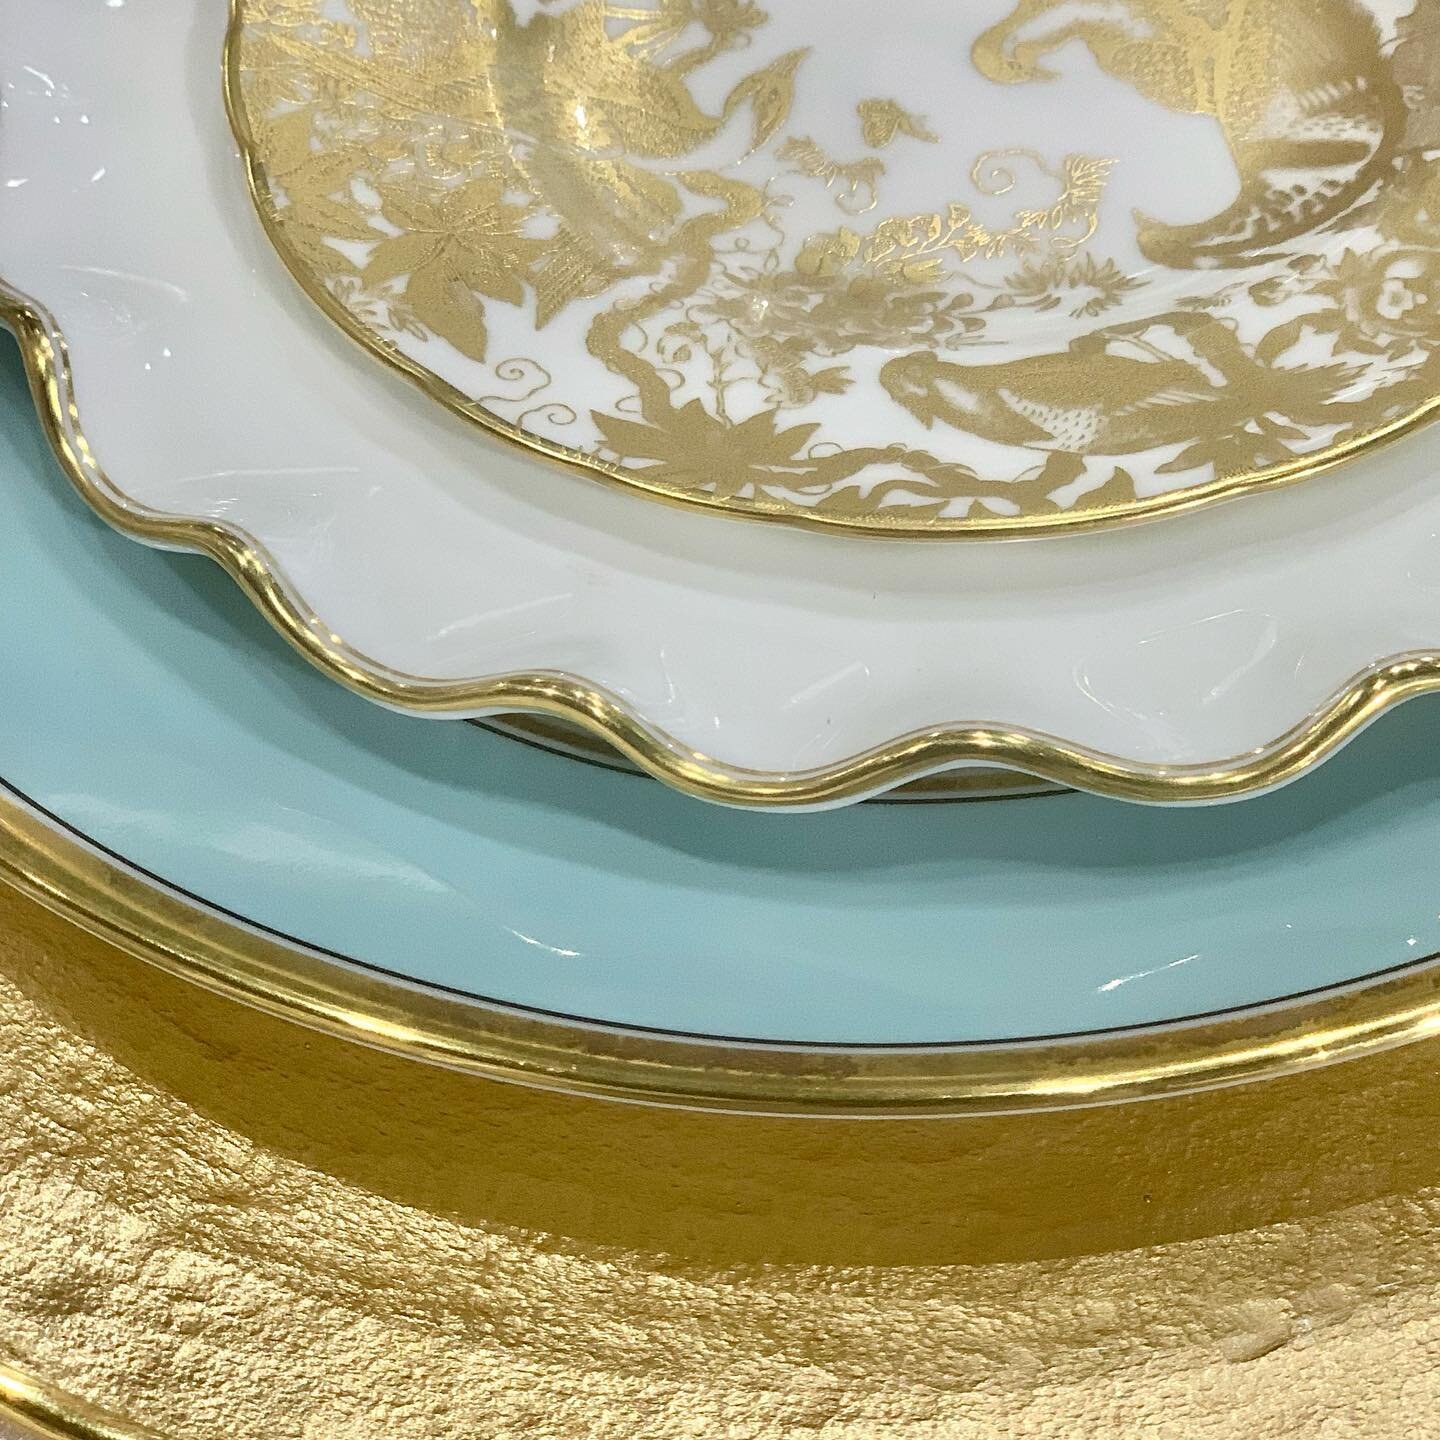 Gold never disappoints when setting a table. It elevates the mood and feels a little fancy!
 
901-766-6746
SUMMER Hours&hellip;
Tuesday-Saturday 11-4
Monday by Appointment

#Social #Shoplocal #901 #Shop901 #tabletoptuesday